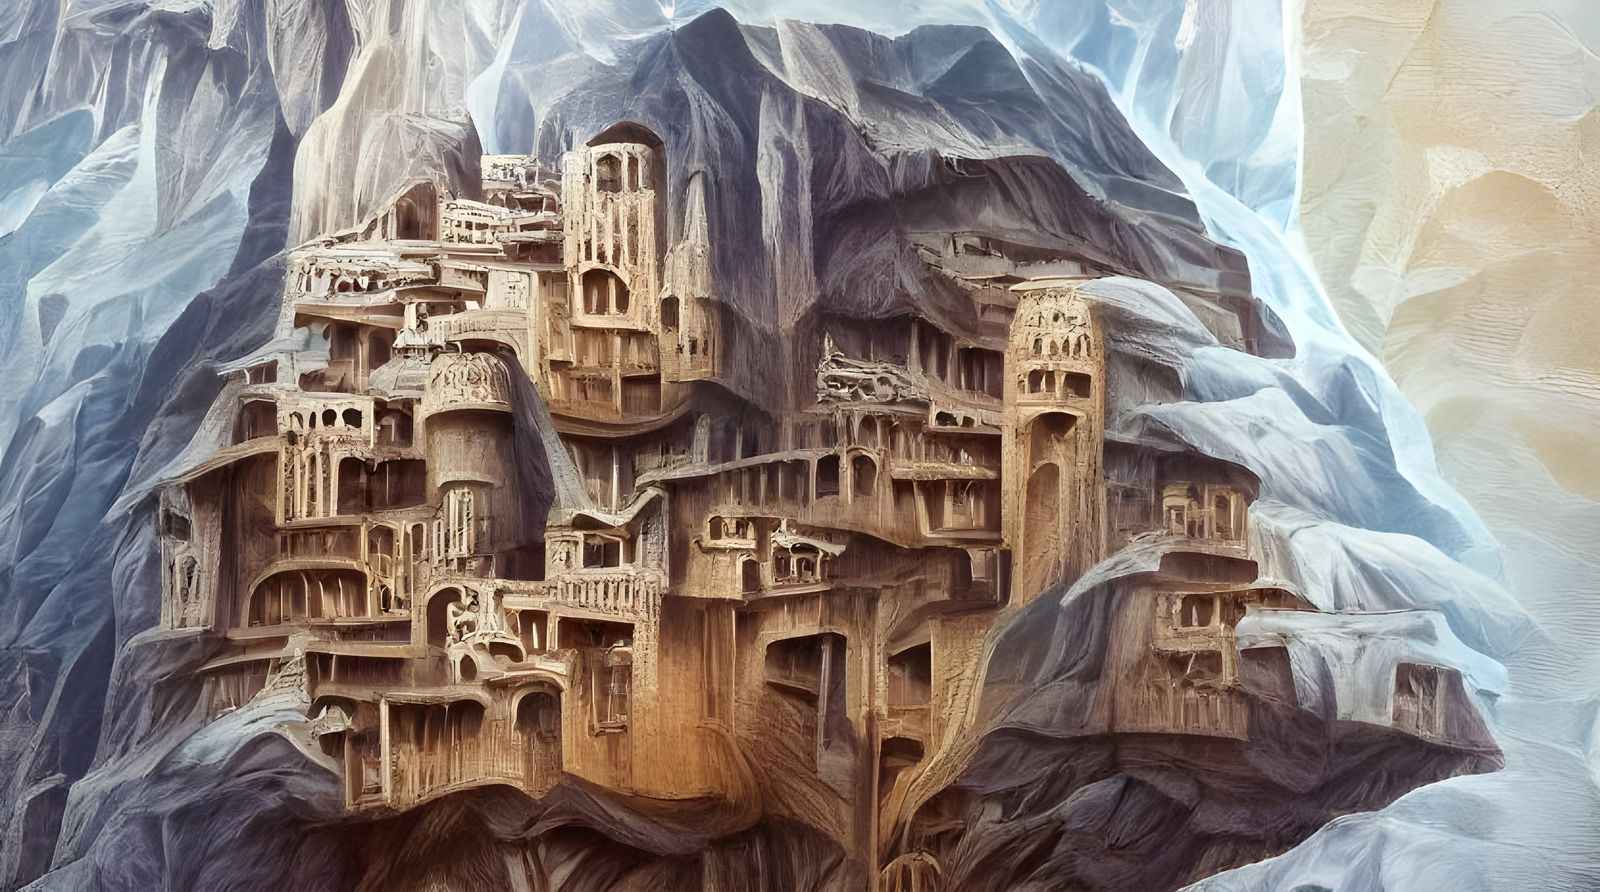 ancient vertical city carved into the mountainside fantasy illustration